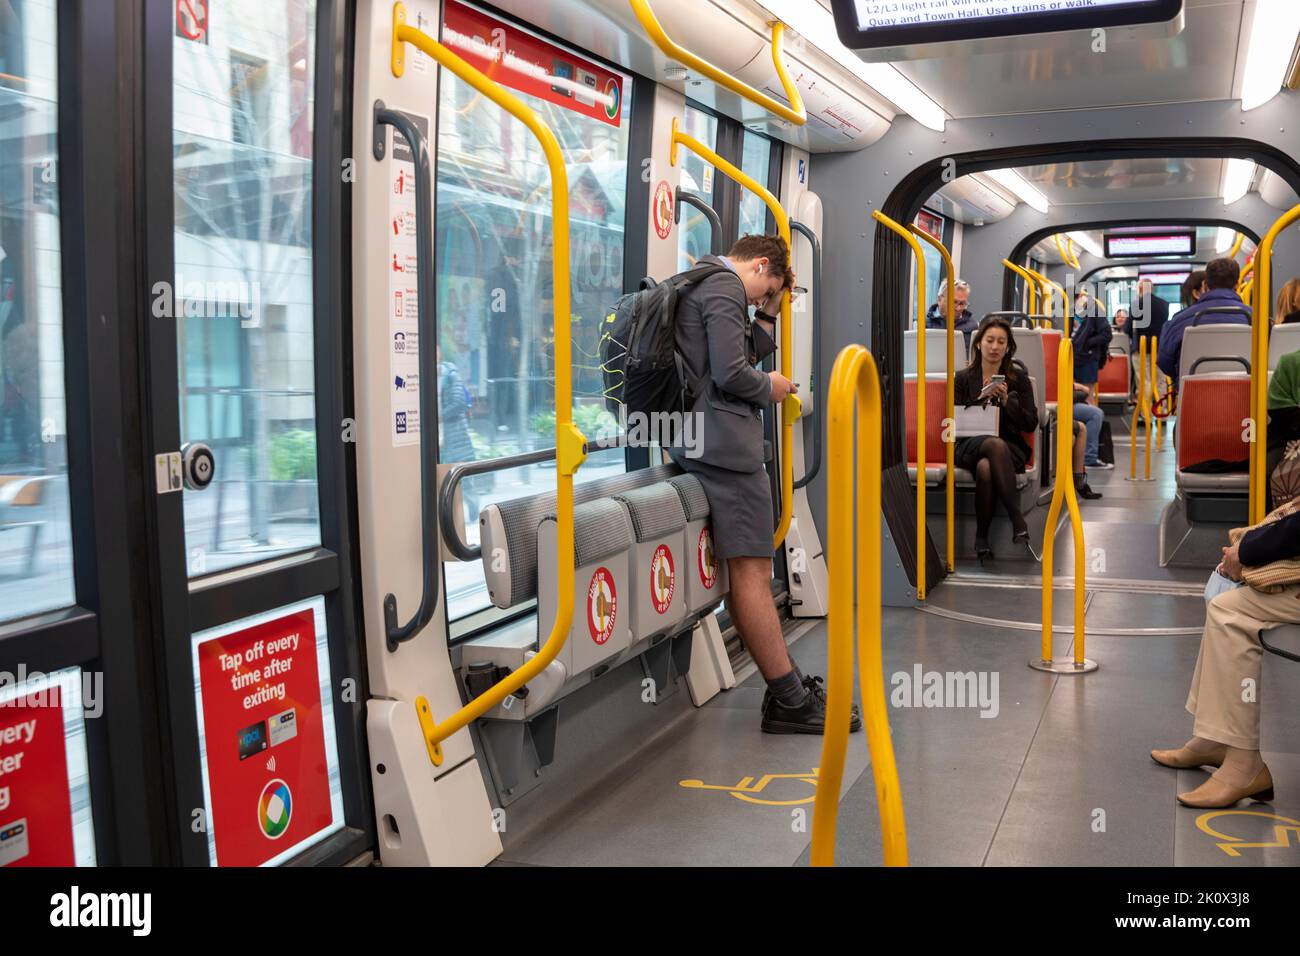 Interior of Sydney light rail train carriage with passengers and a school boy standing and sitting,Sydney city centre,NSW,Australia Stock Photo